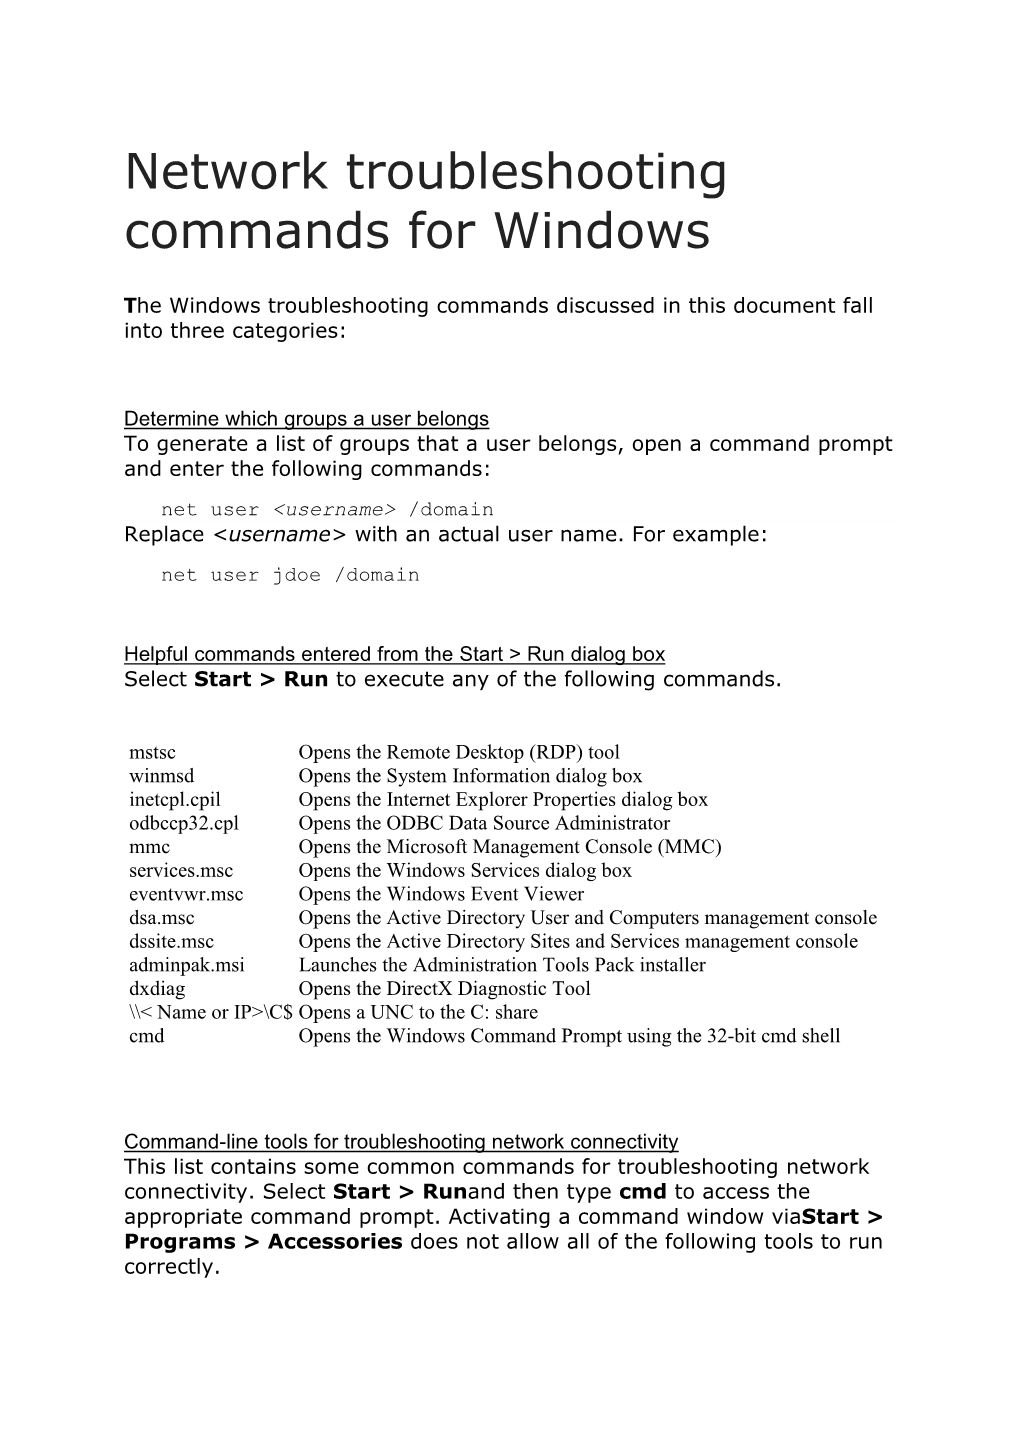 Network Troubleshooting Commands for Windows